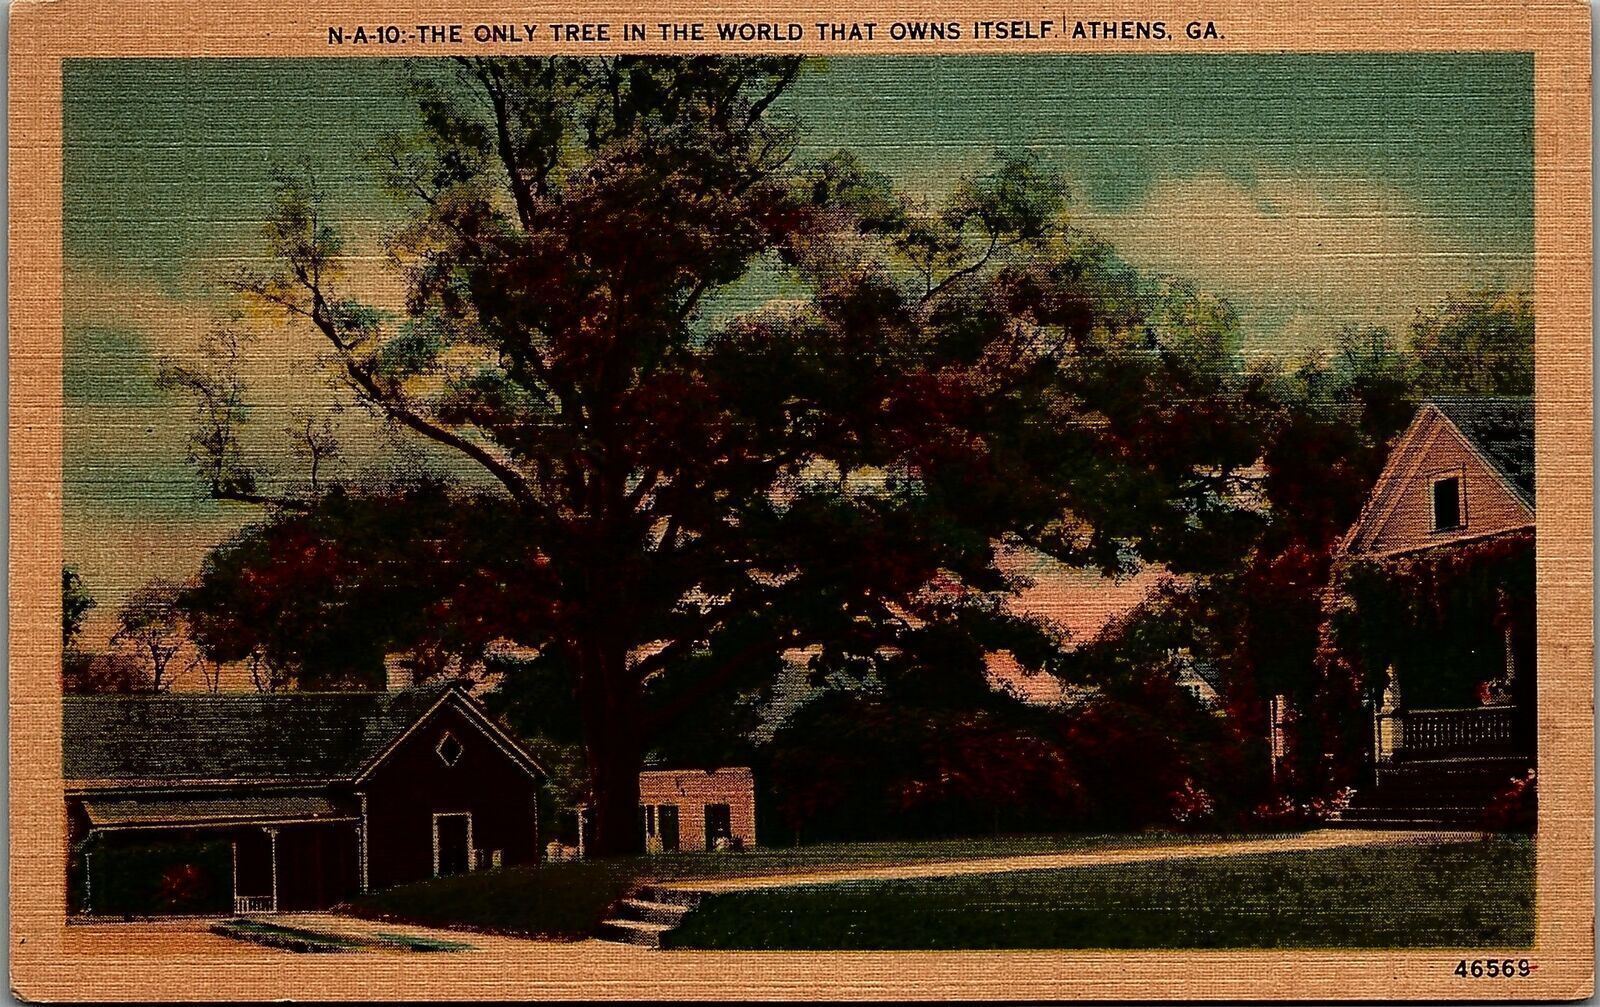 c1940 ATHENS GA ONLY TREE IN WORLD THAT OWNS ITSELF LINEN POSTCARD 34-210